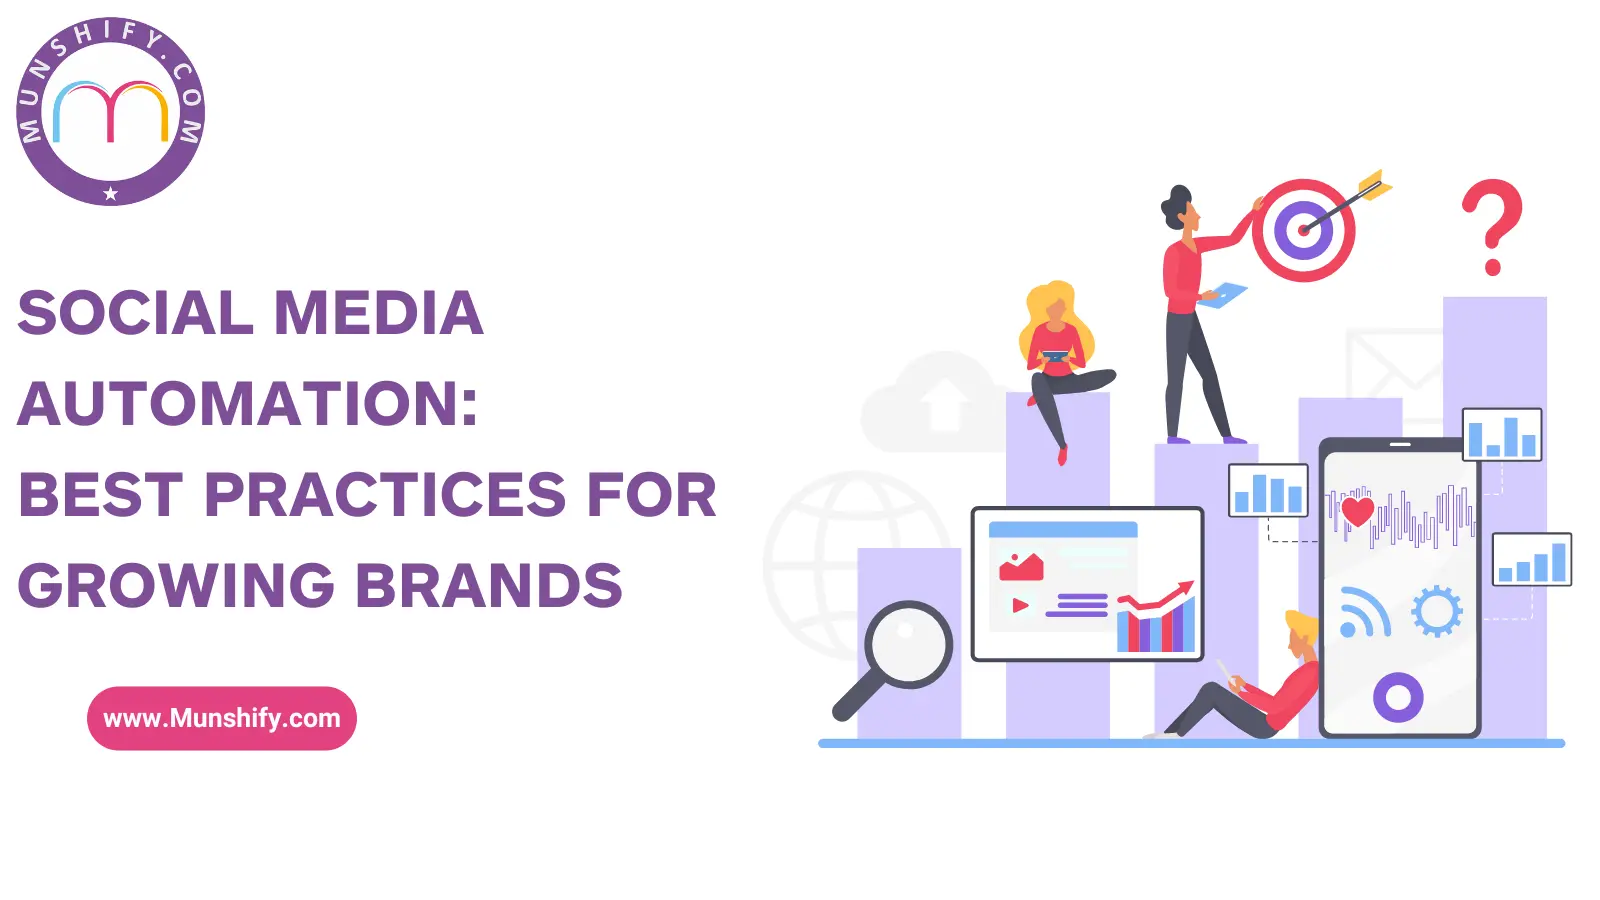 Social Media Automation Best Practices for Growing Brands